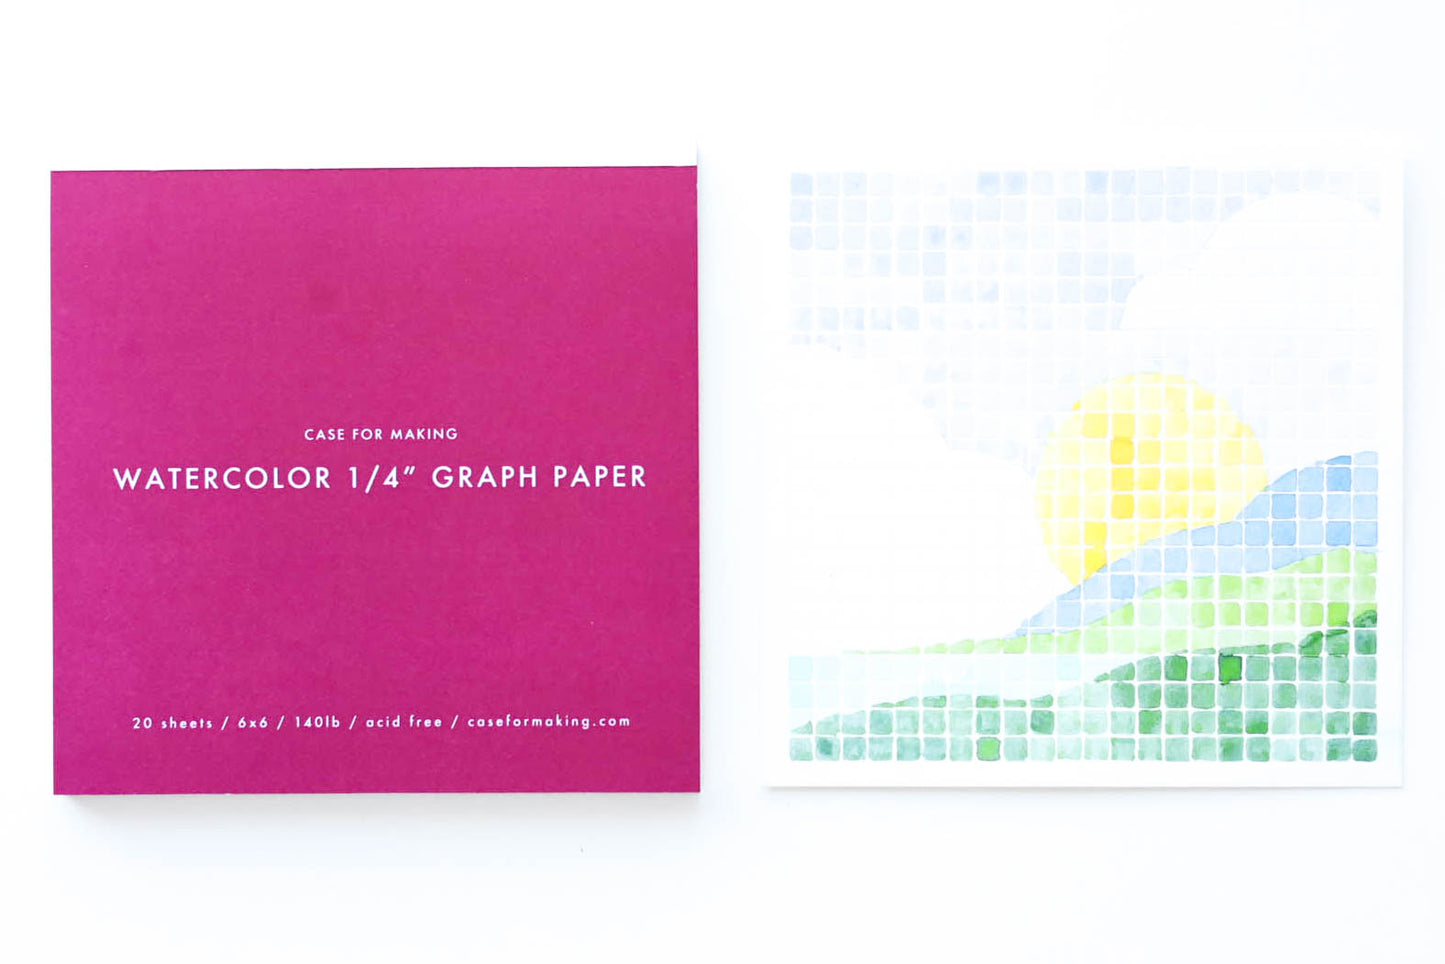 The closed, top-bound 6" x 6" Watercolor 1/4" Graph Paper pad.  Showing the deep fuchsia cover with white lettering.  Also shown is a painted sample sheet of the 1/4" Graph Paper.